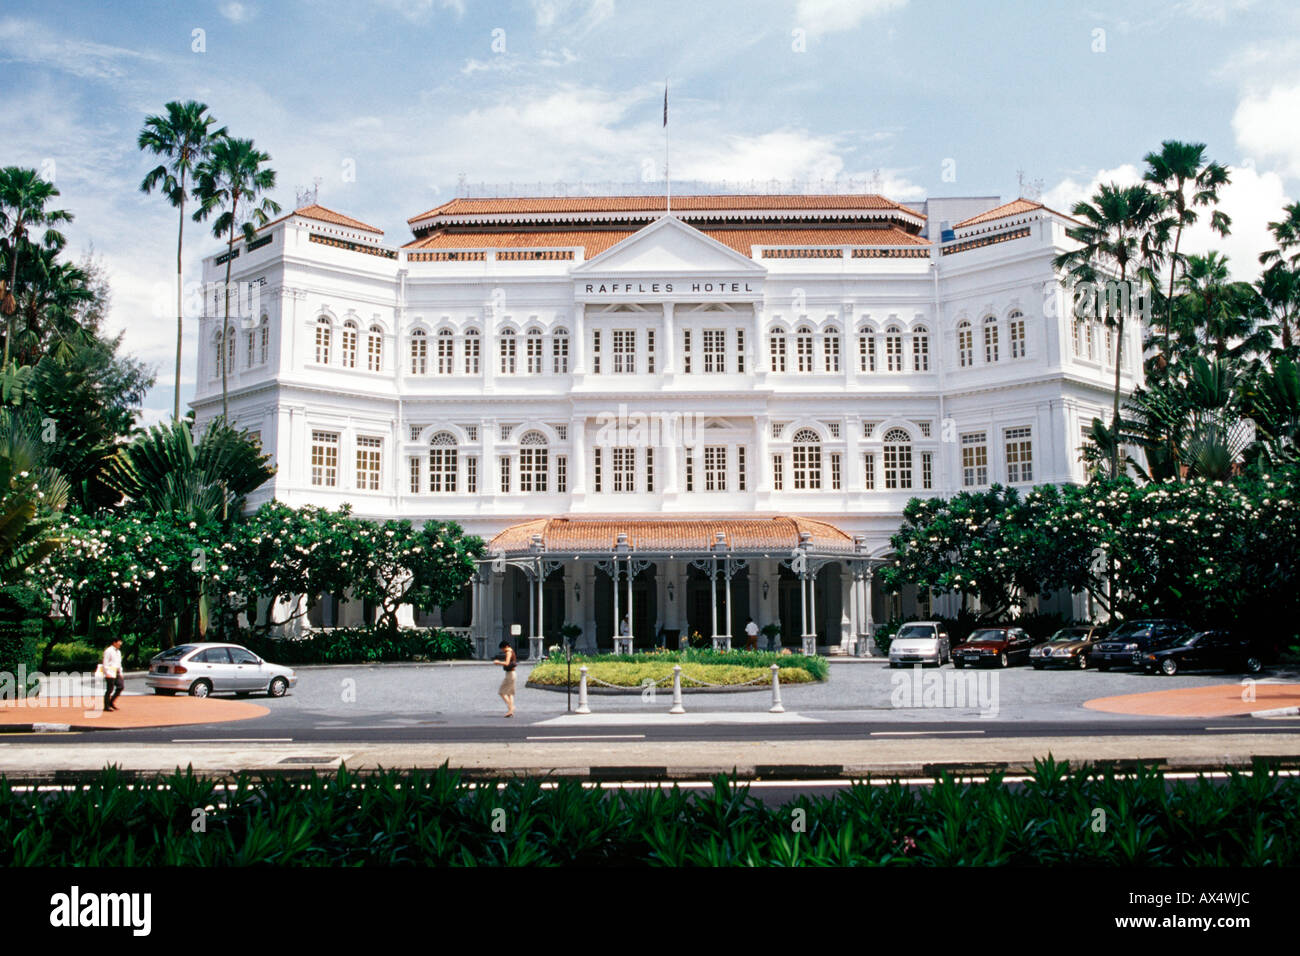 The front of the Raffles hotel in Singapore. Stock Photo